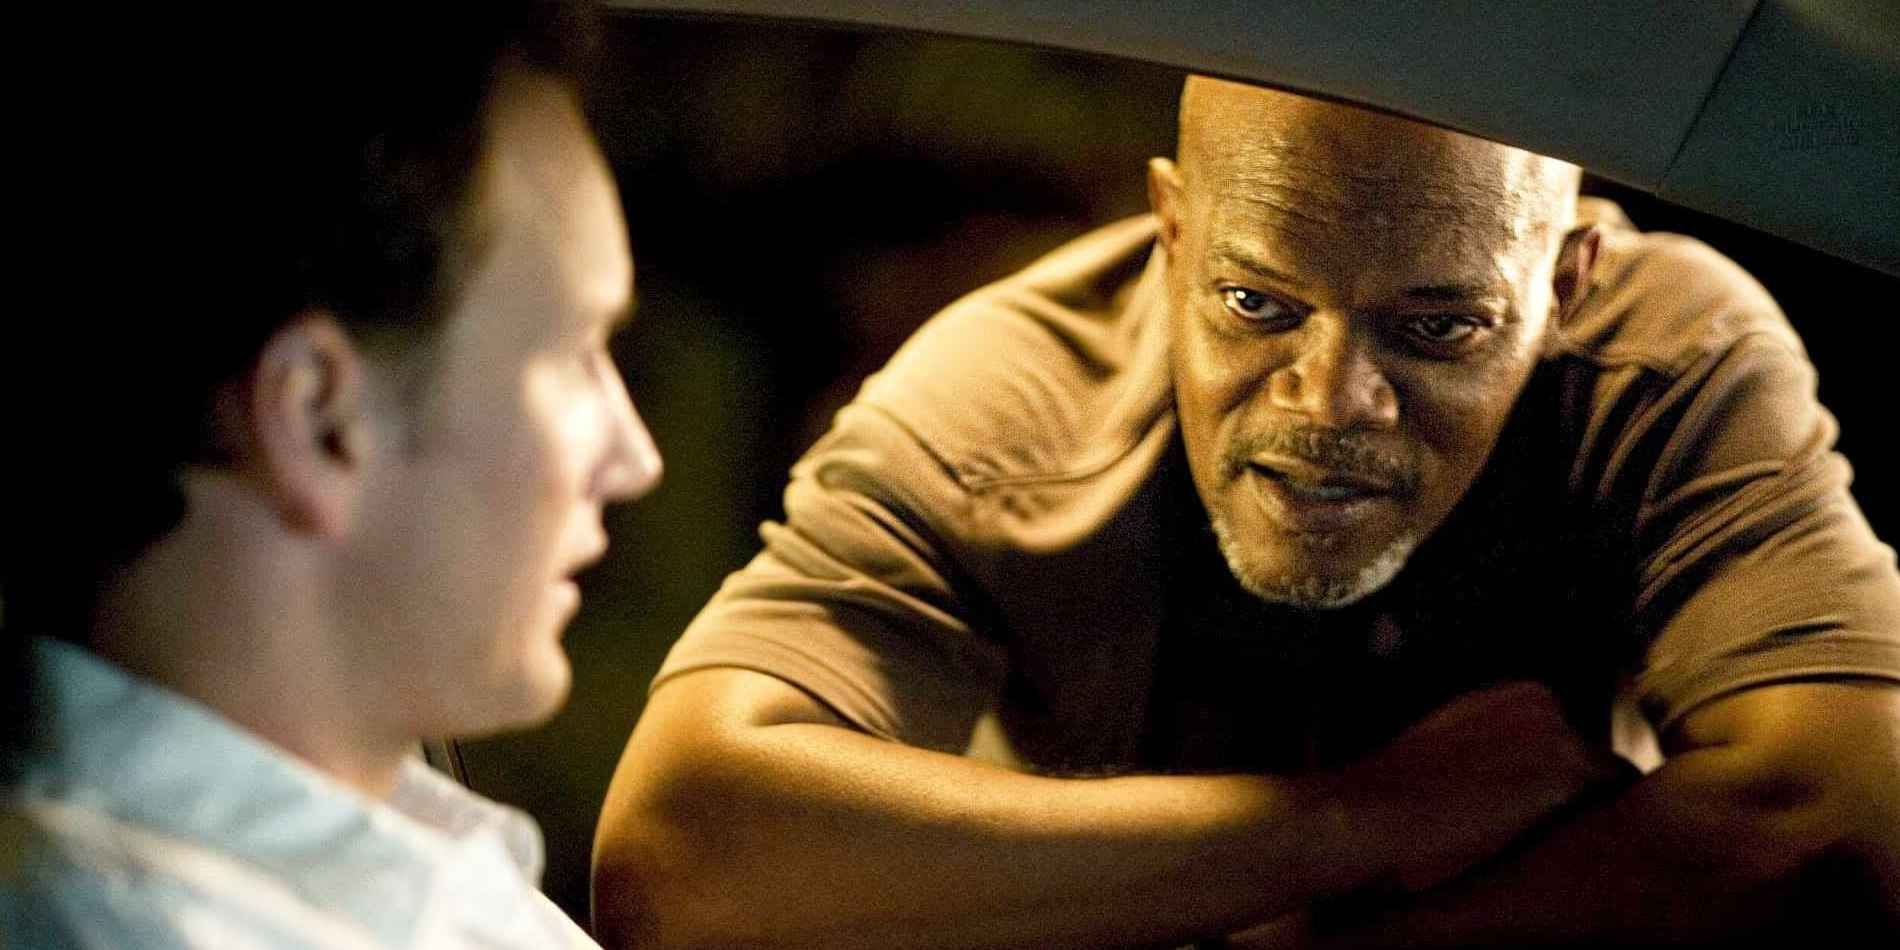 Samuel L. Jackson confronts Patrick Wilson at the window of his car in Lakeview Terrace